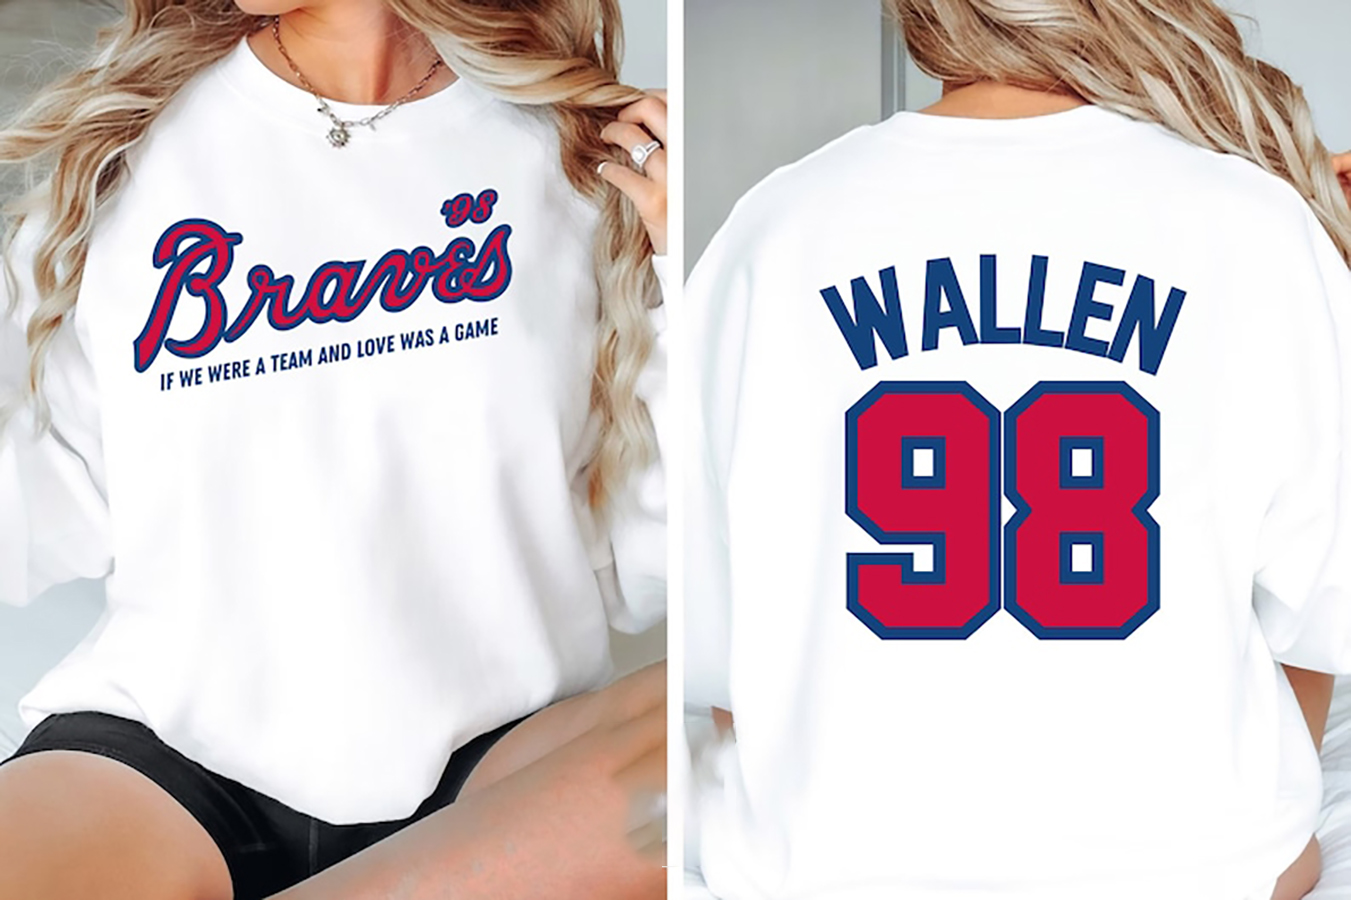 If We Were A Team and Love Was A Game Morgan Wallen 98 Braves